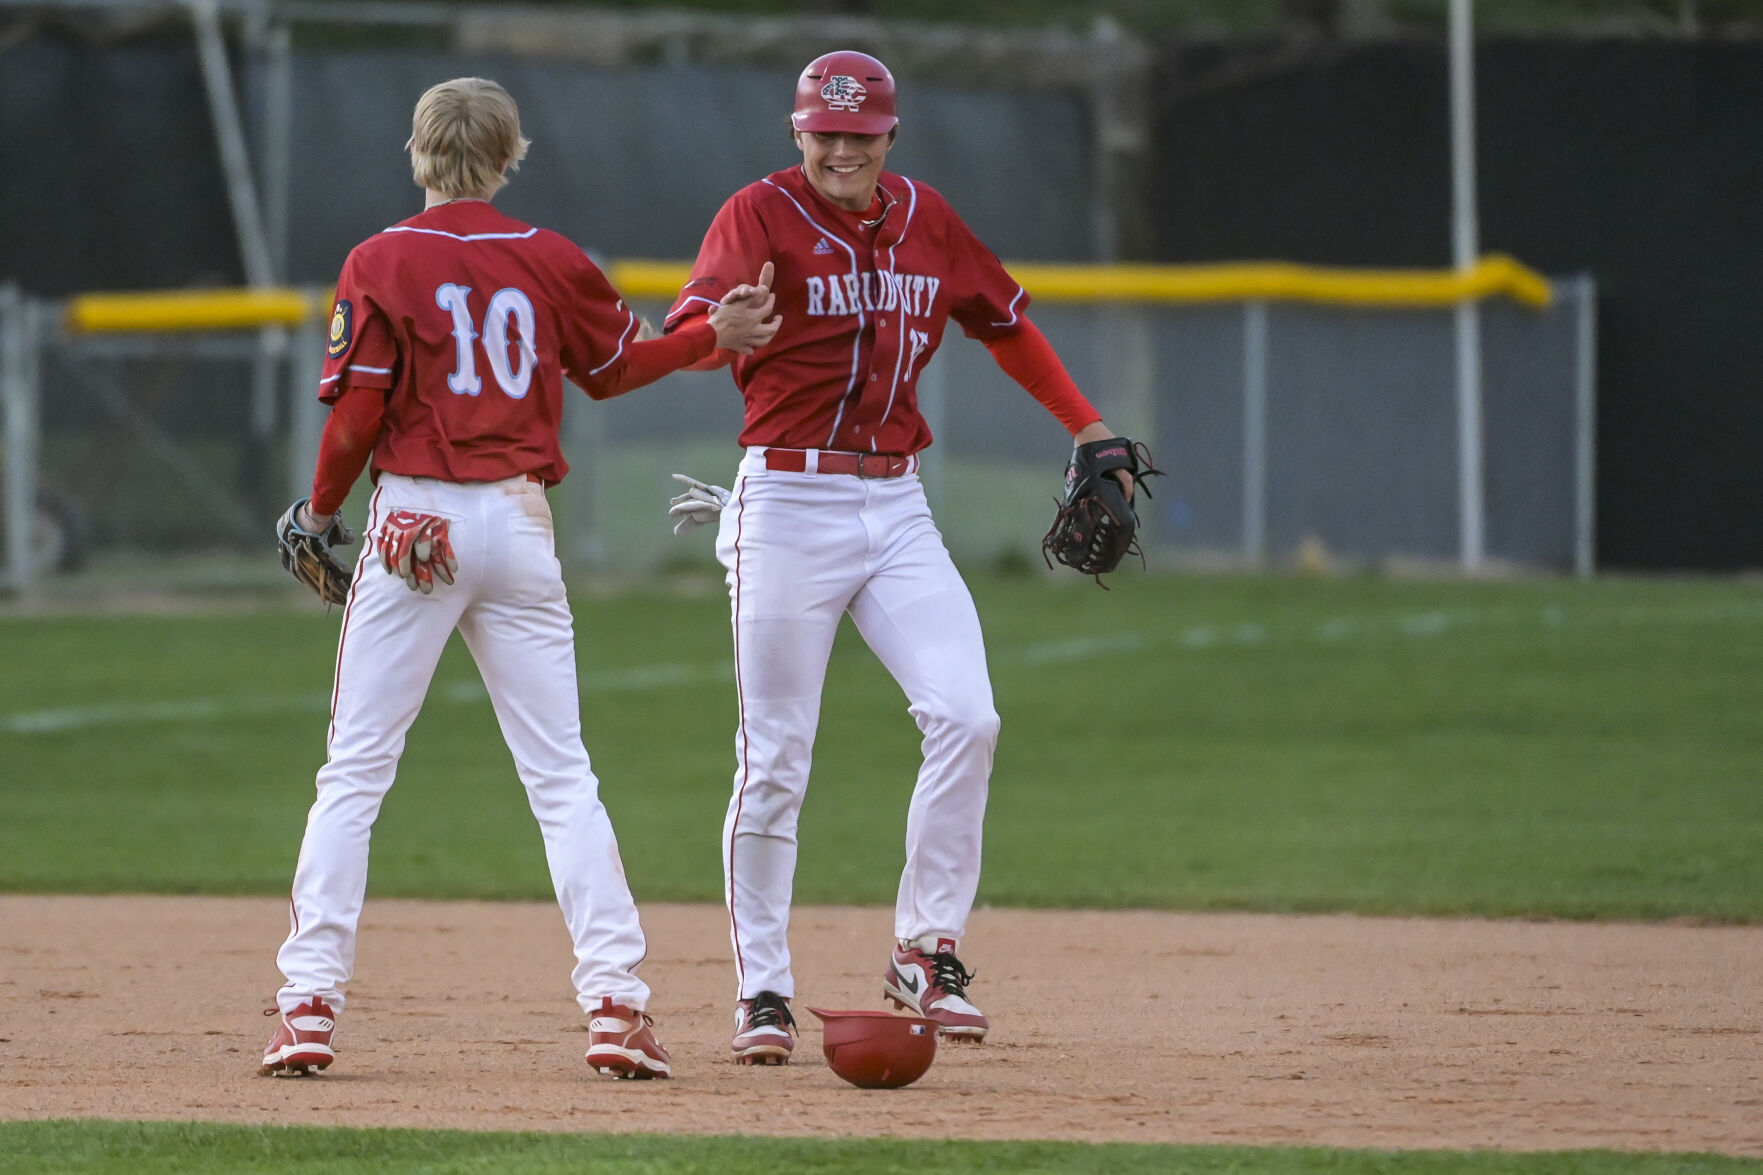 Rapid City Post 22 Crushes Post 320 in Hometown Rivalry Game with Stellar Performances